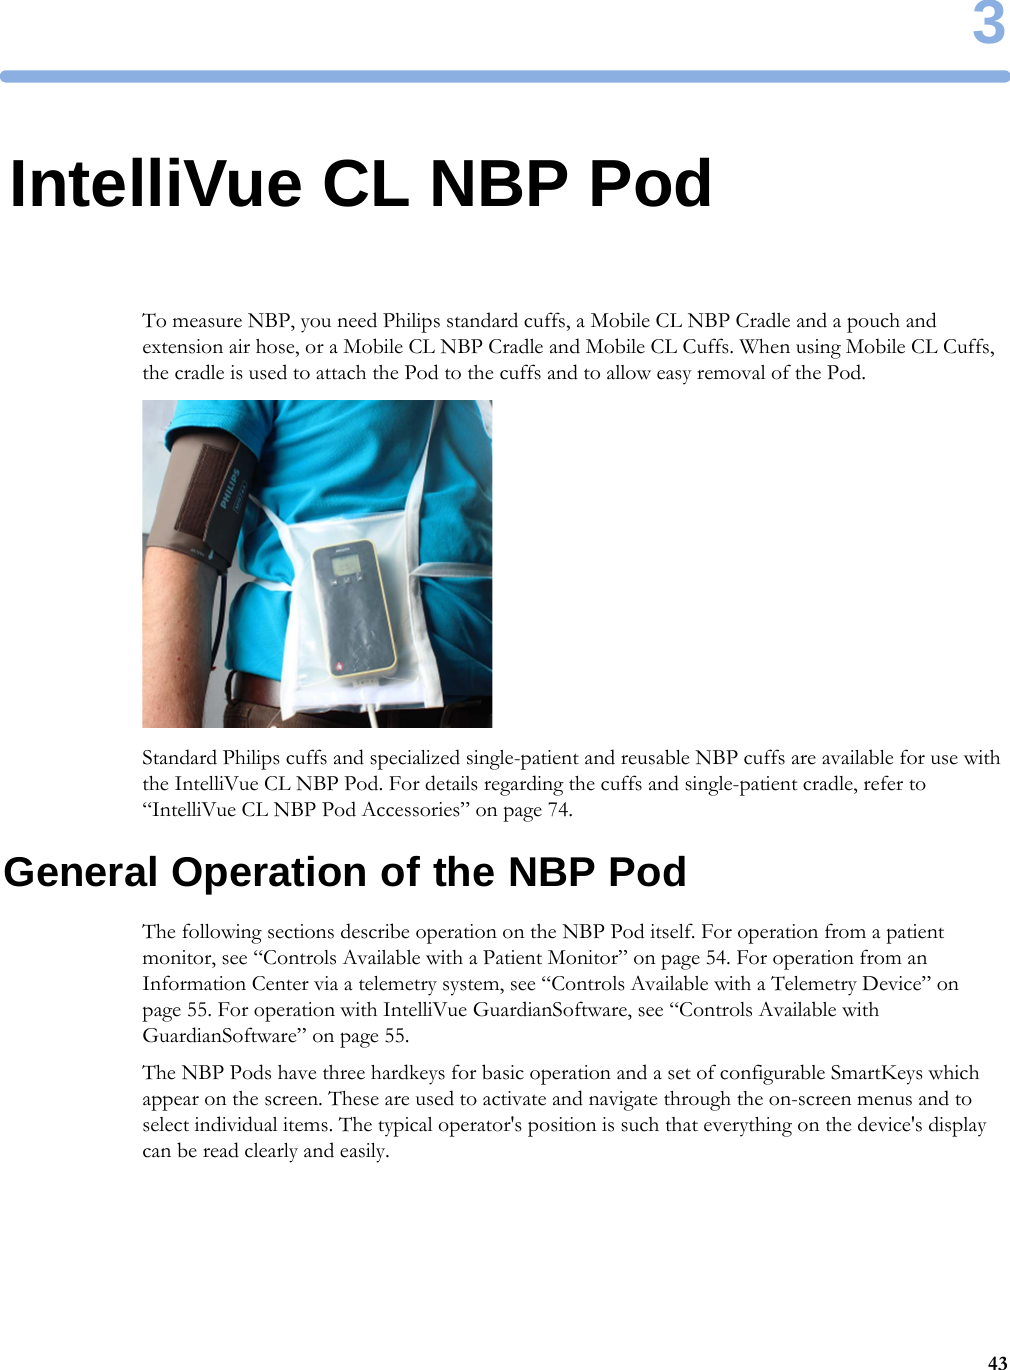 3433IntelliVue CL NBP PodTo measure NBP, you need Philips standard cuffs, a Mobile CL NBP Cradle and a pouch and extension air hose, or a Mobile CL NBP Cradle and Mobile CL Cuffs. When using Mobile CL Cuffs, the cradle is used to attach the Pod to the cuffs and to allow easy removal of the Pod.Standard Philips cuffs and specialized single-patient and reusable NBP cuffs are available for use with the IntelliVue CL NBP Pod. For details regarding the cuffs and single-patient cradle, refer to “IntelliVue CL NBP Pod Accessories” on page 74.General Operation of the NBP PodThe following sections describe operation on the NBP Pod itself. For operation from a patient monitor, see “Controls Available with a Patient Monitor” on page 54. For operation from an Information Center via a telemetry system, see “Controls Available with a Telemetry Device” on page 55. For operation with IntelliVue GuardianSoftware, see “Controls Available with GuardianSoftware” on page 55.The NBP Pods have three hardkeys for basic operation and a set of configurable SmartKeys which appear on the screen. These are used to activate and navigate through the on-screen menus and to select individual items. The typical operator&apos;s position is such that everything on the device&apos;s display can be read clearly and easily.